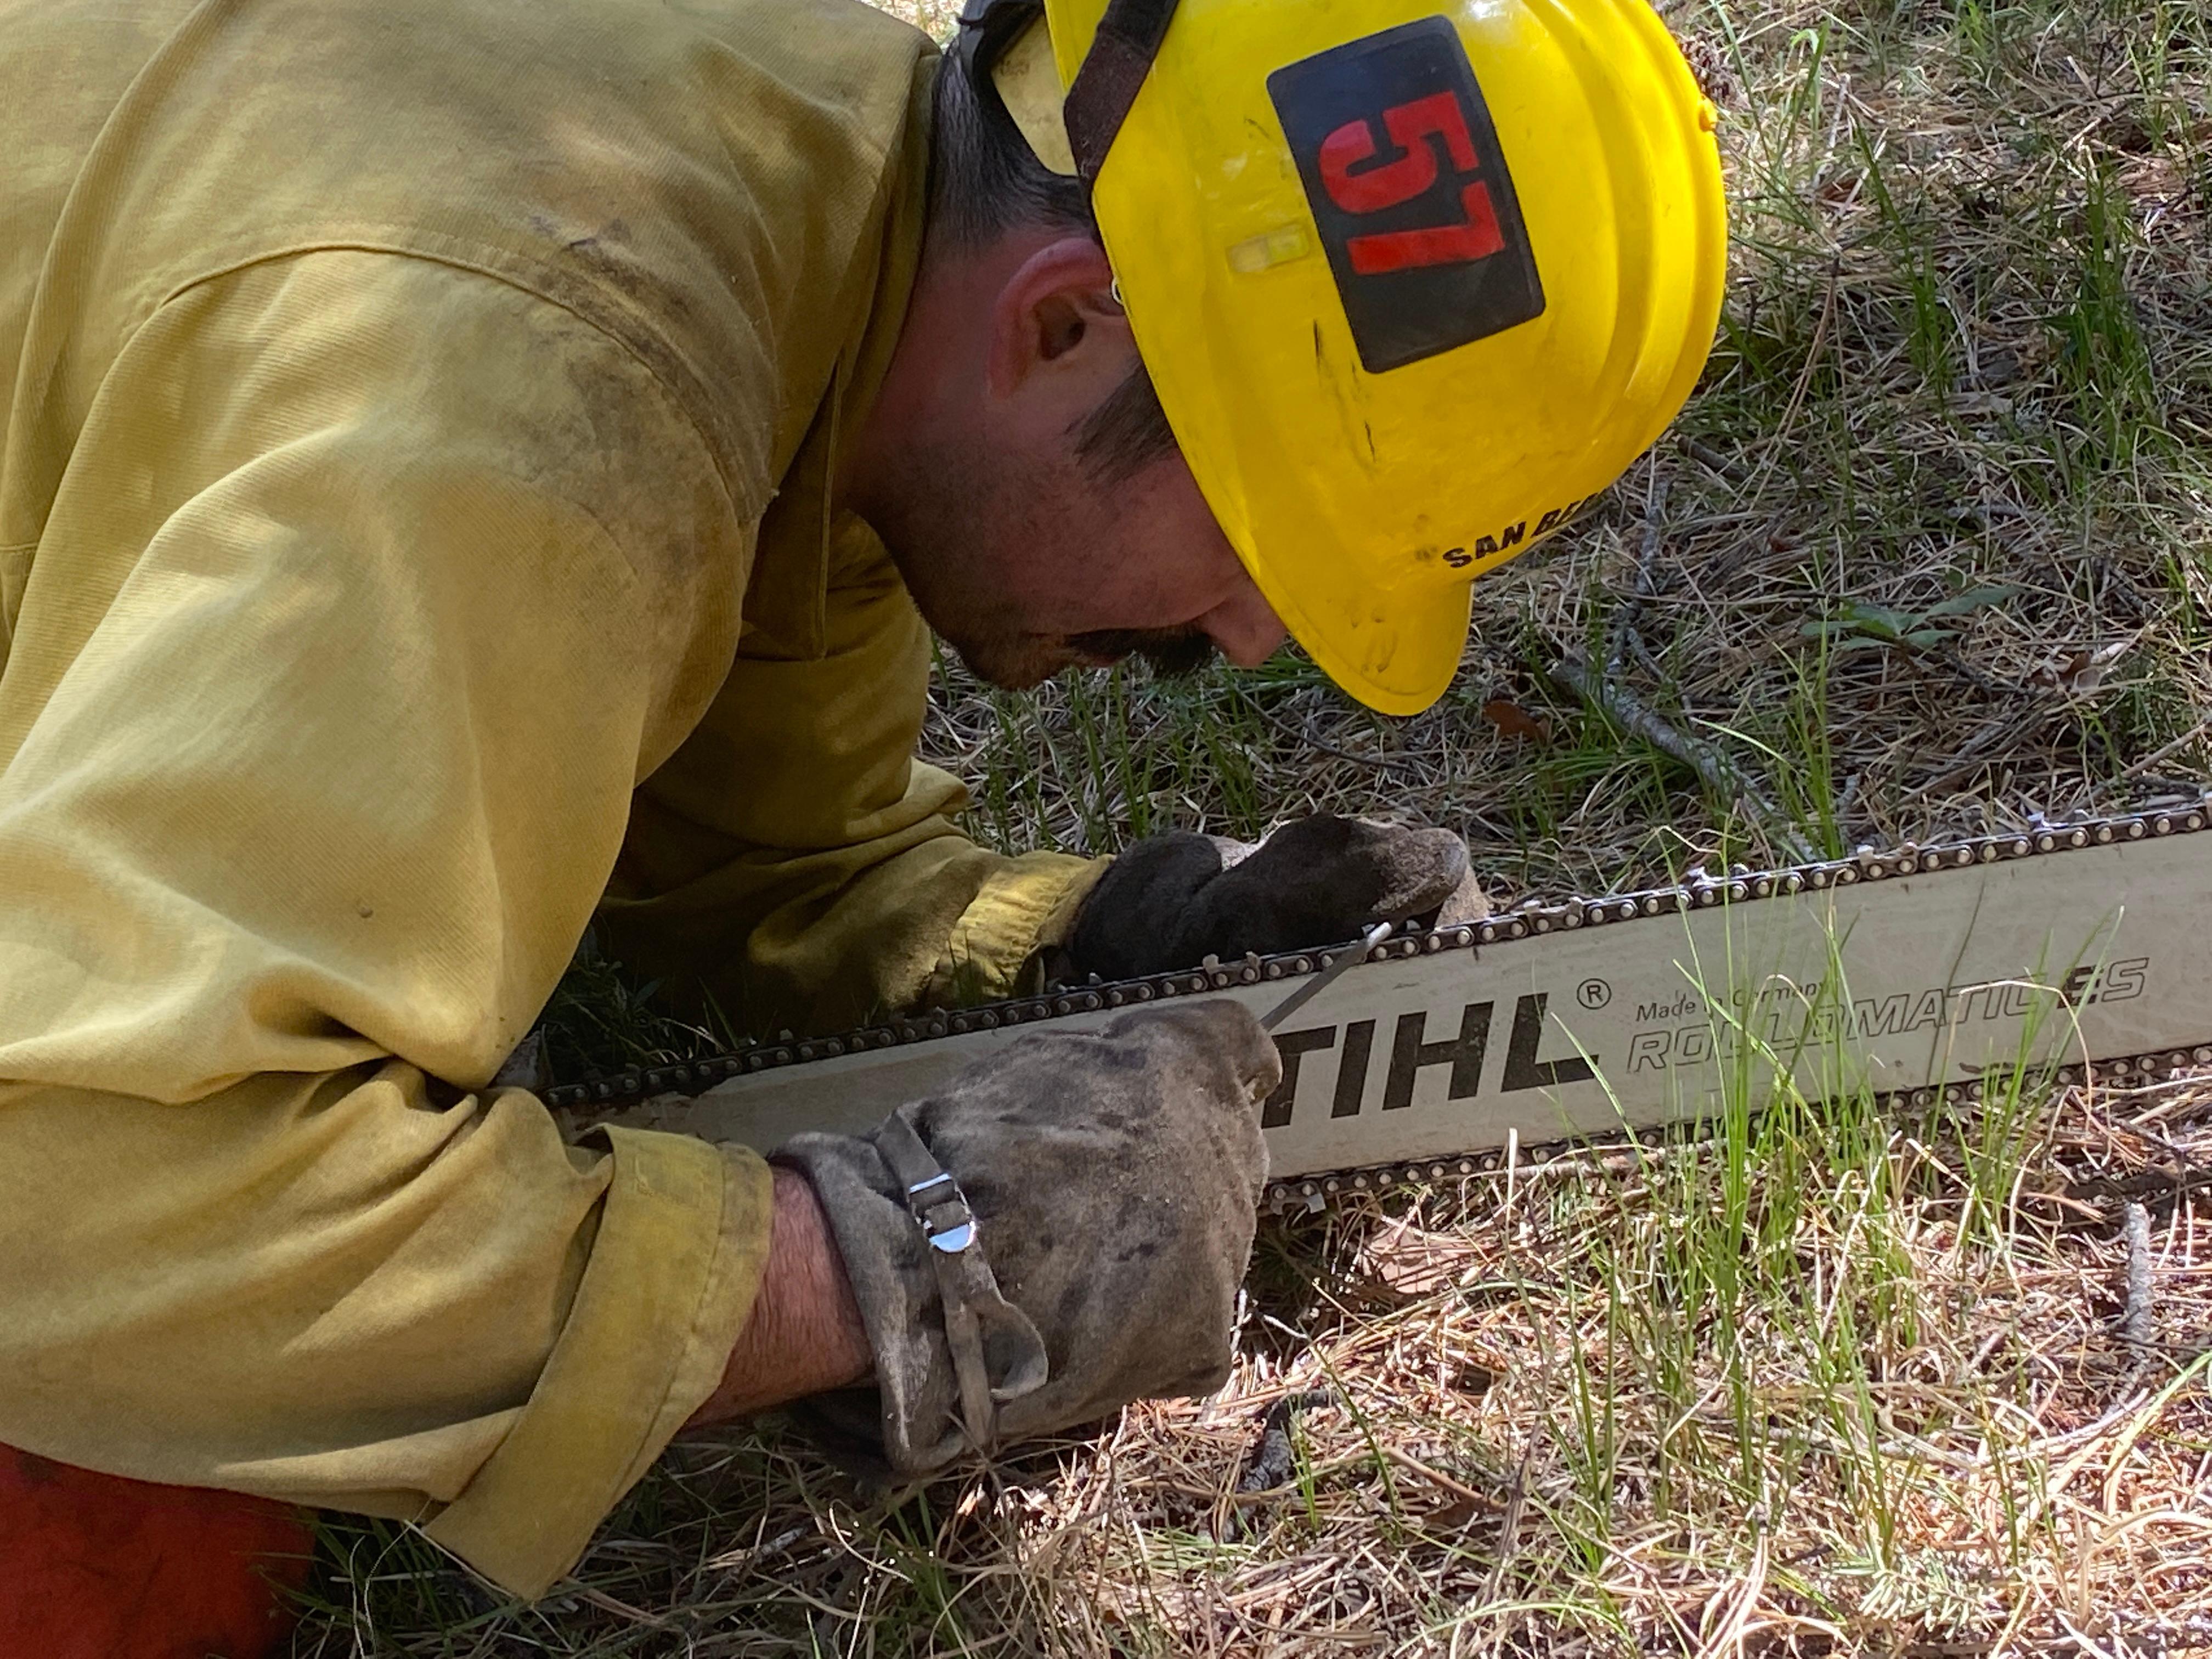 Image of a firefighter with yellow shirt, yellow helmet, and gloves kneels over a chainsaw. Firefighter uses a long metal tool to sharpen the chain on chainsaw.